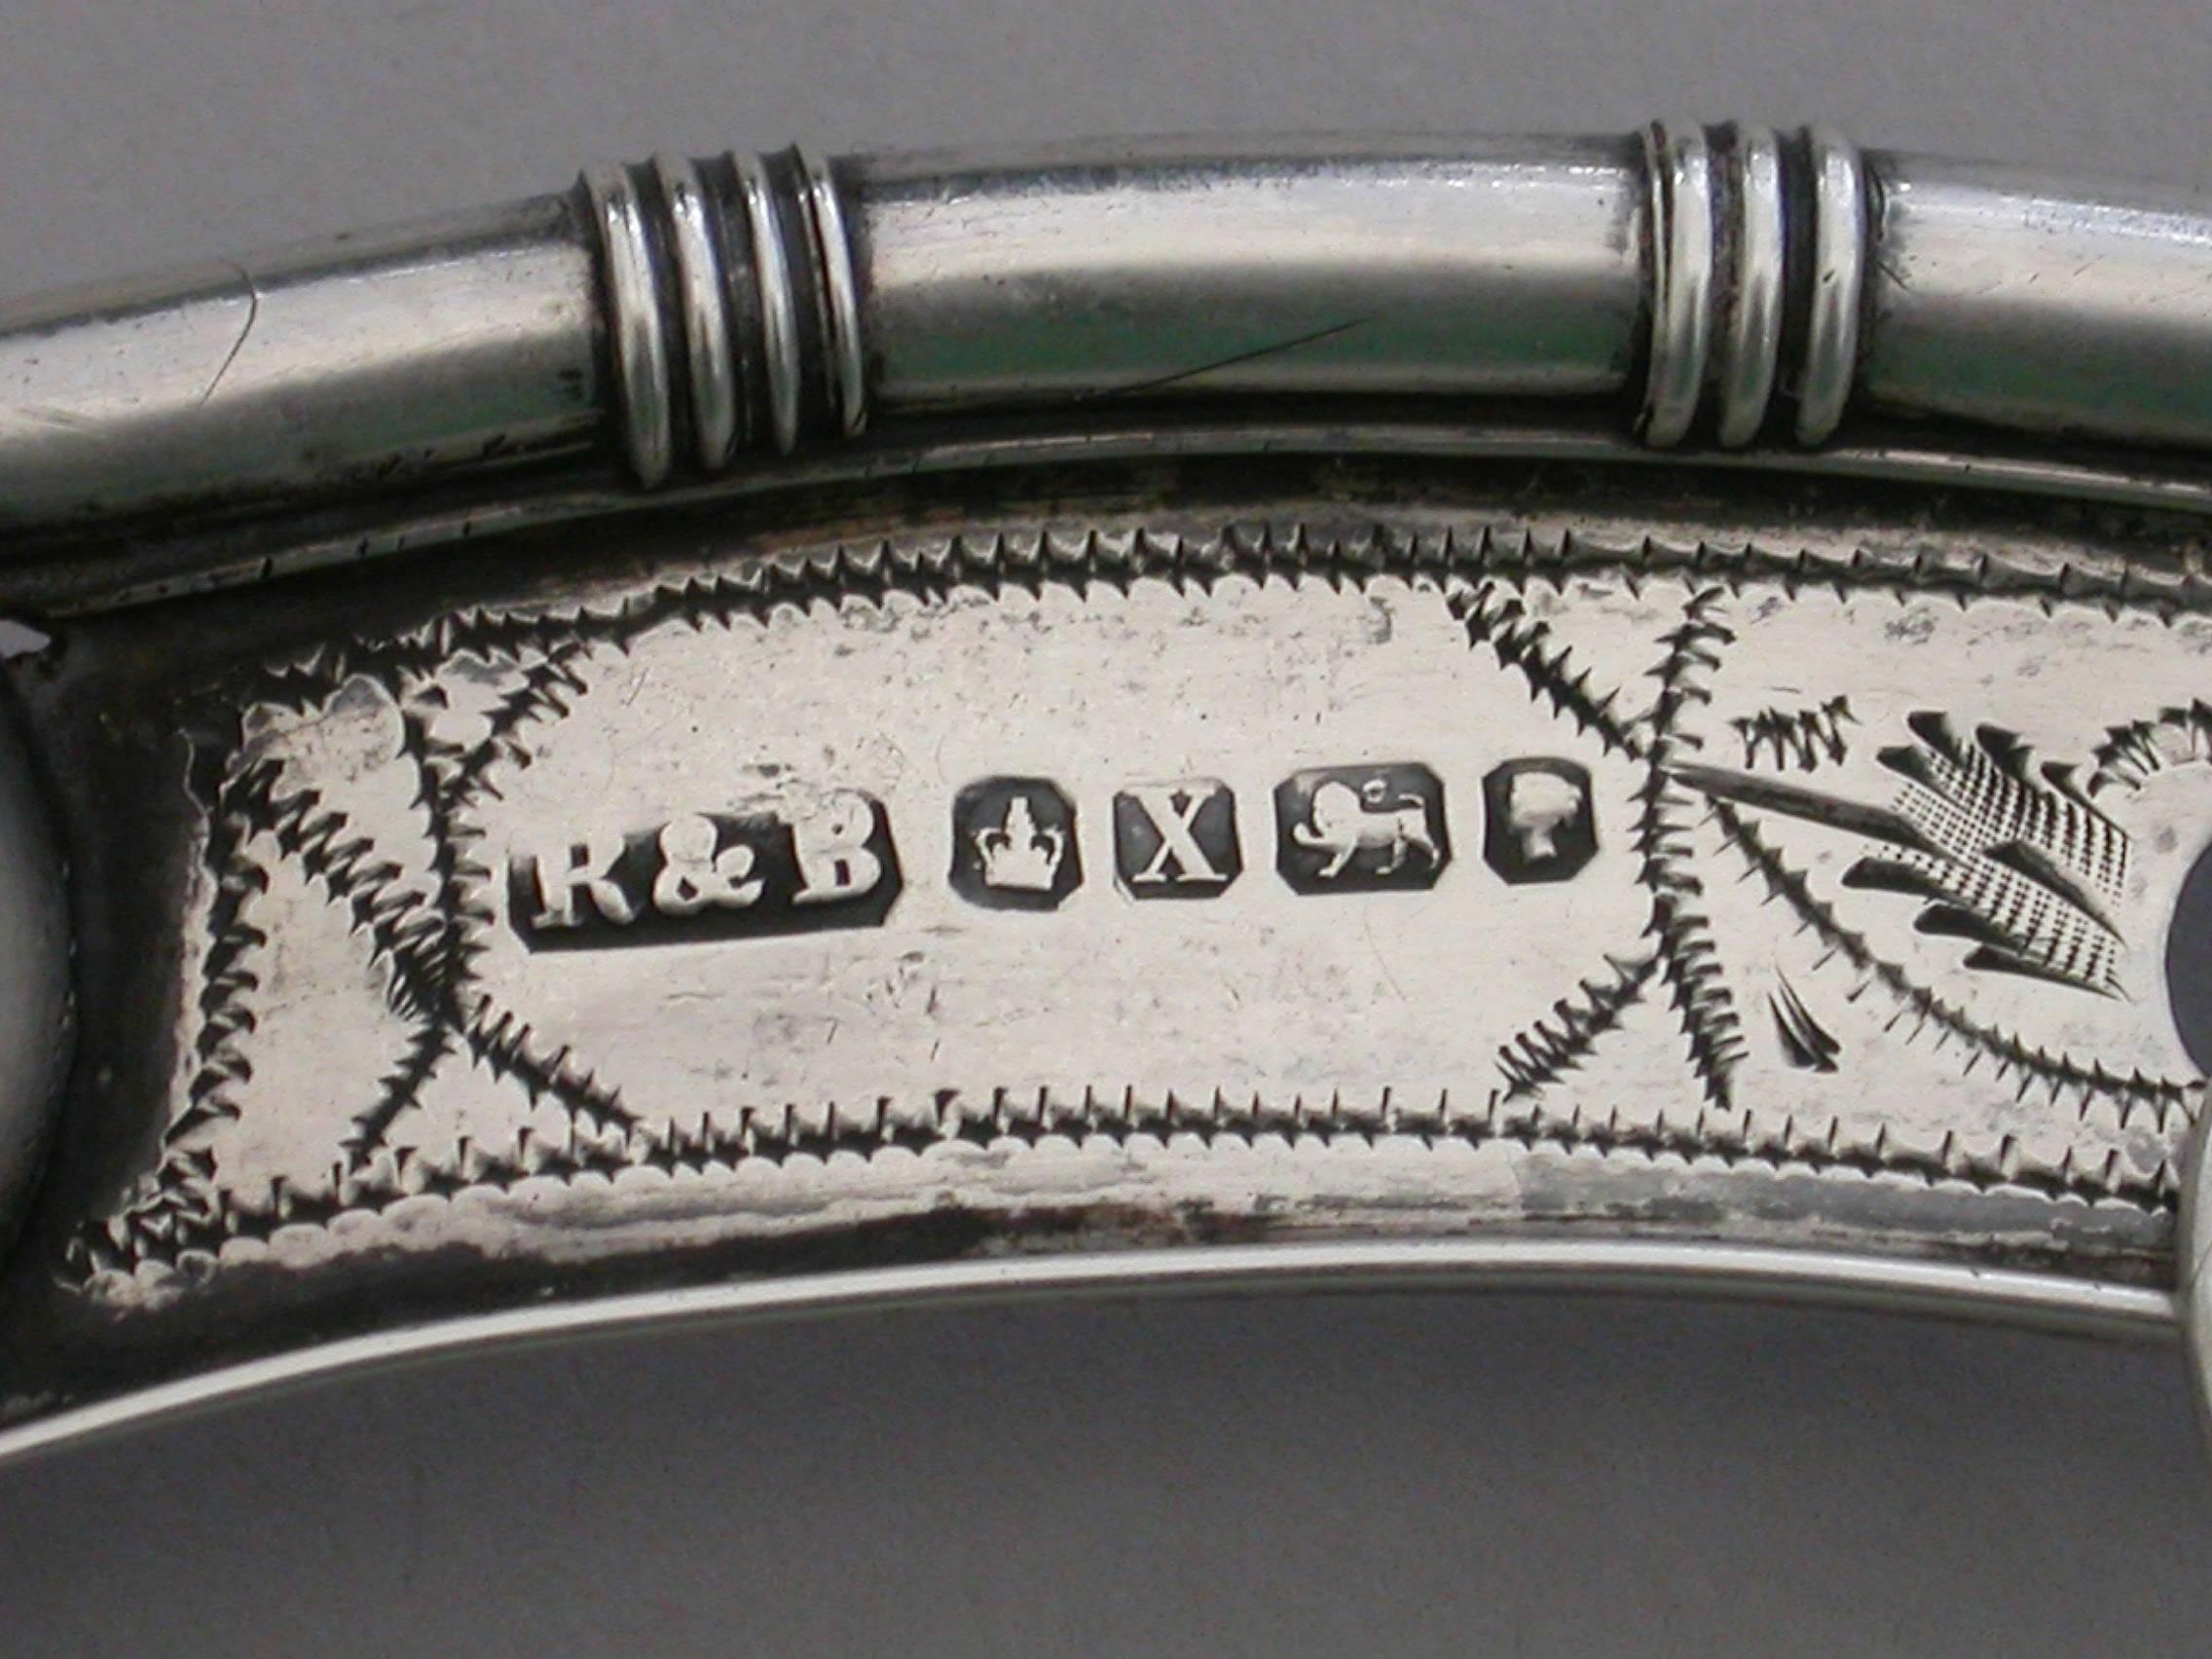 A Victorian silver Bosuns Whistle (or boatswain whistle), the buoy stamped on either side with the royal navy crown and anchor mark, the keel with scratch engraved decoration and a vacant cartouche, reeded bands to the pipe. Complete with suspension